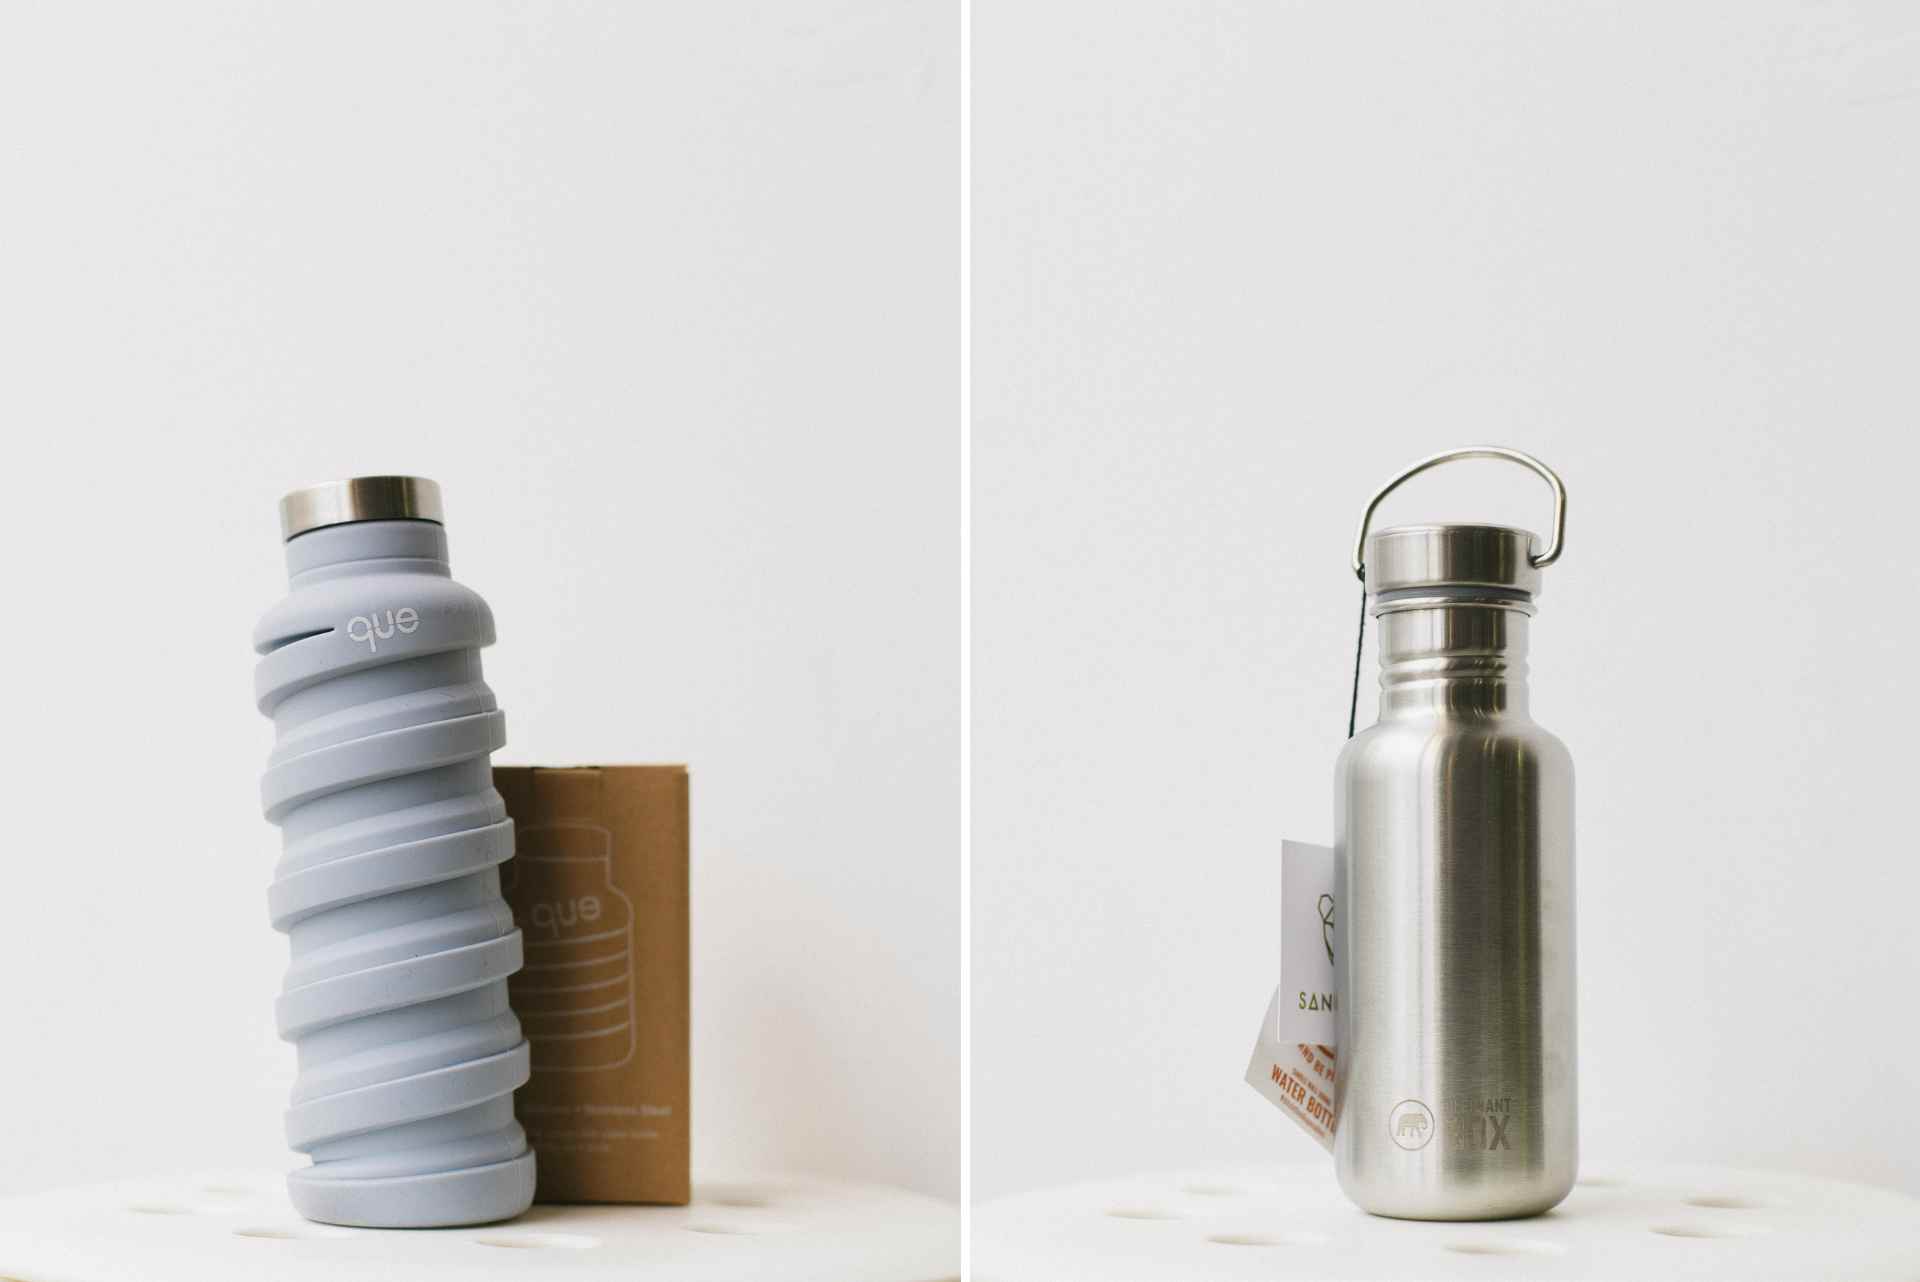 que-and-elephant-box-reusable-water-bottles